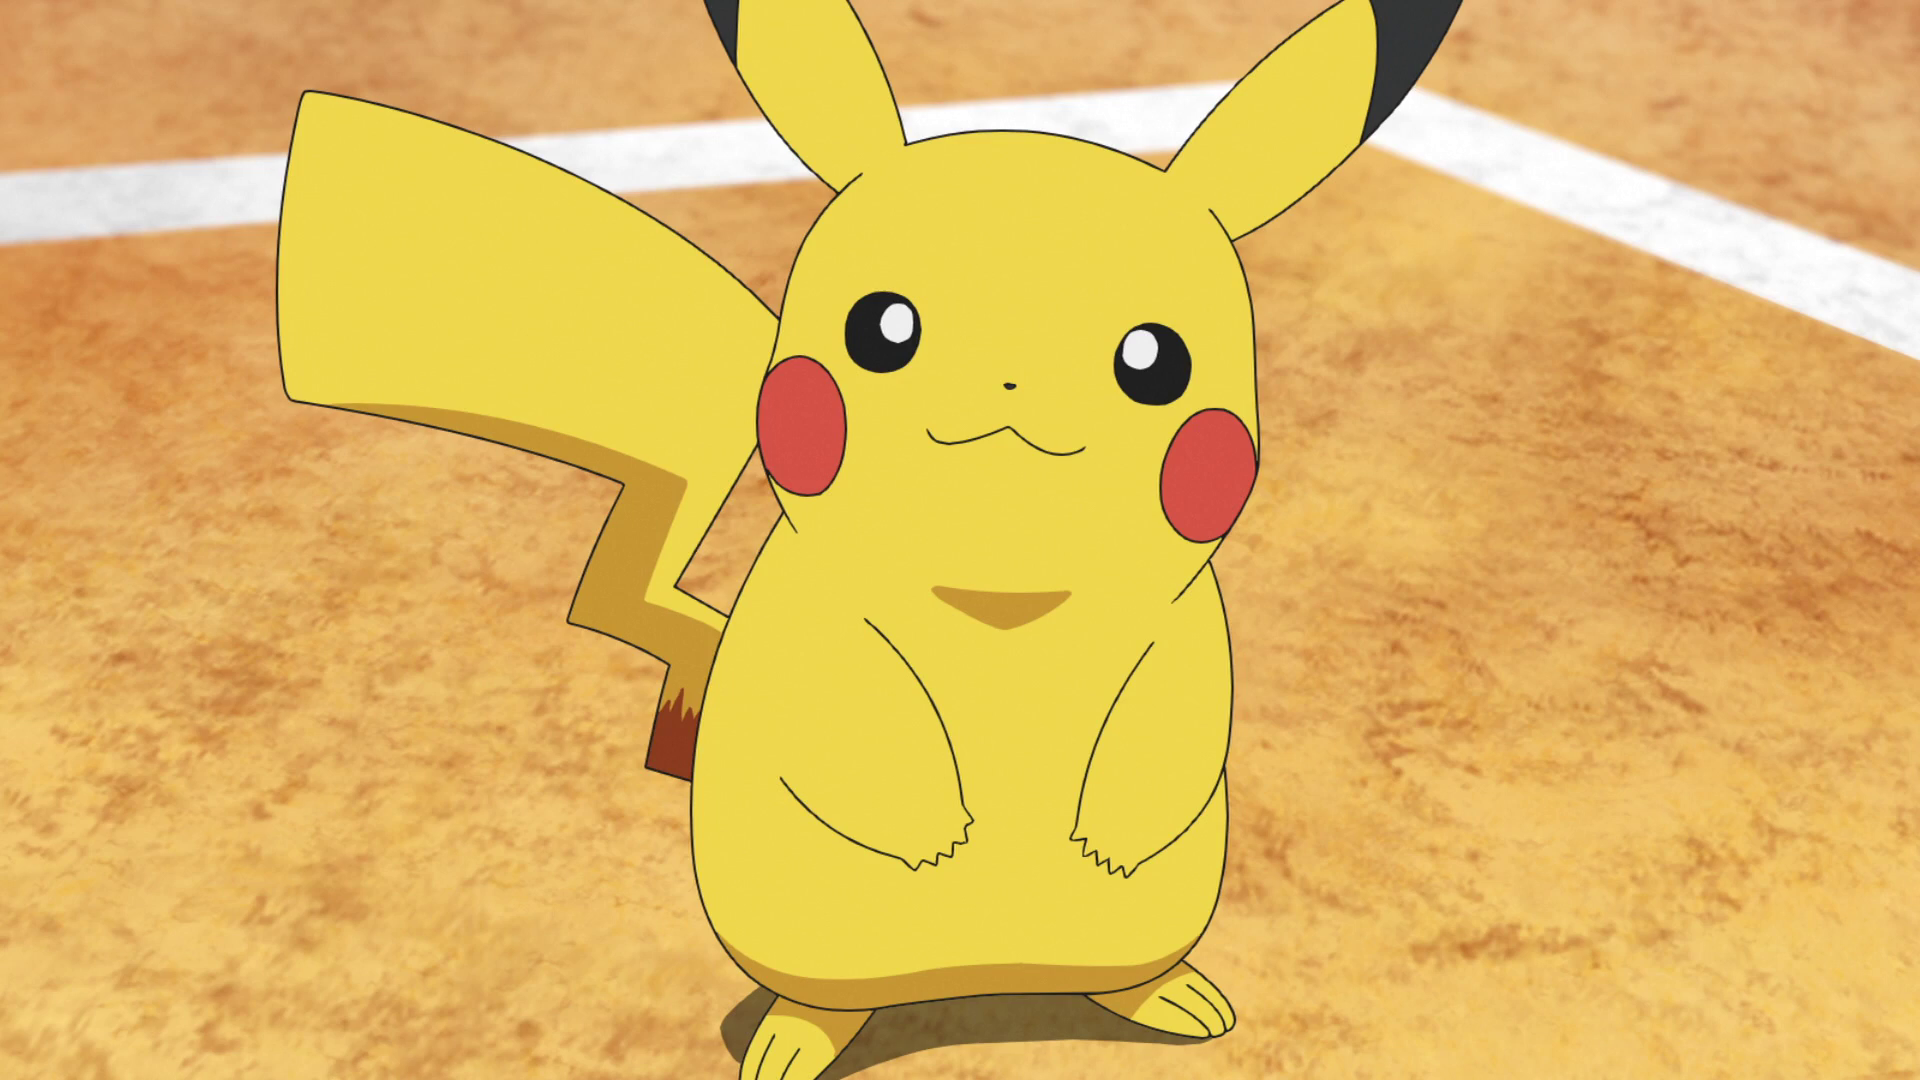 What moves does Pikachu learn and when?